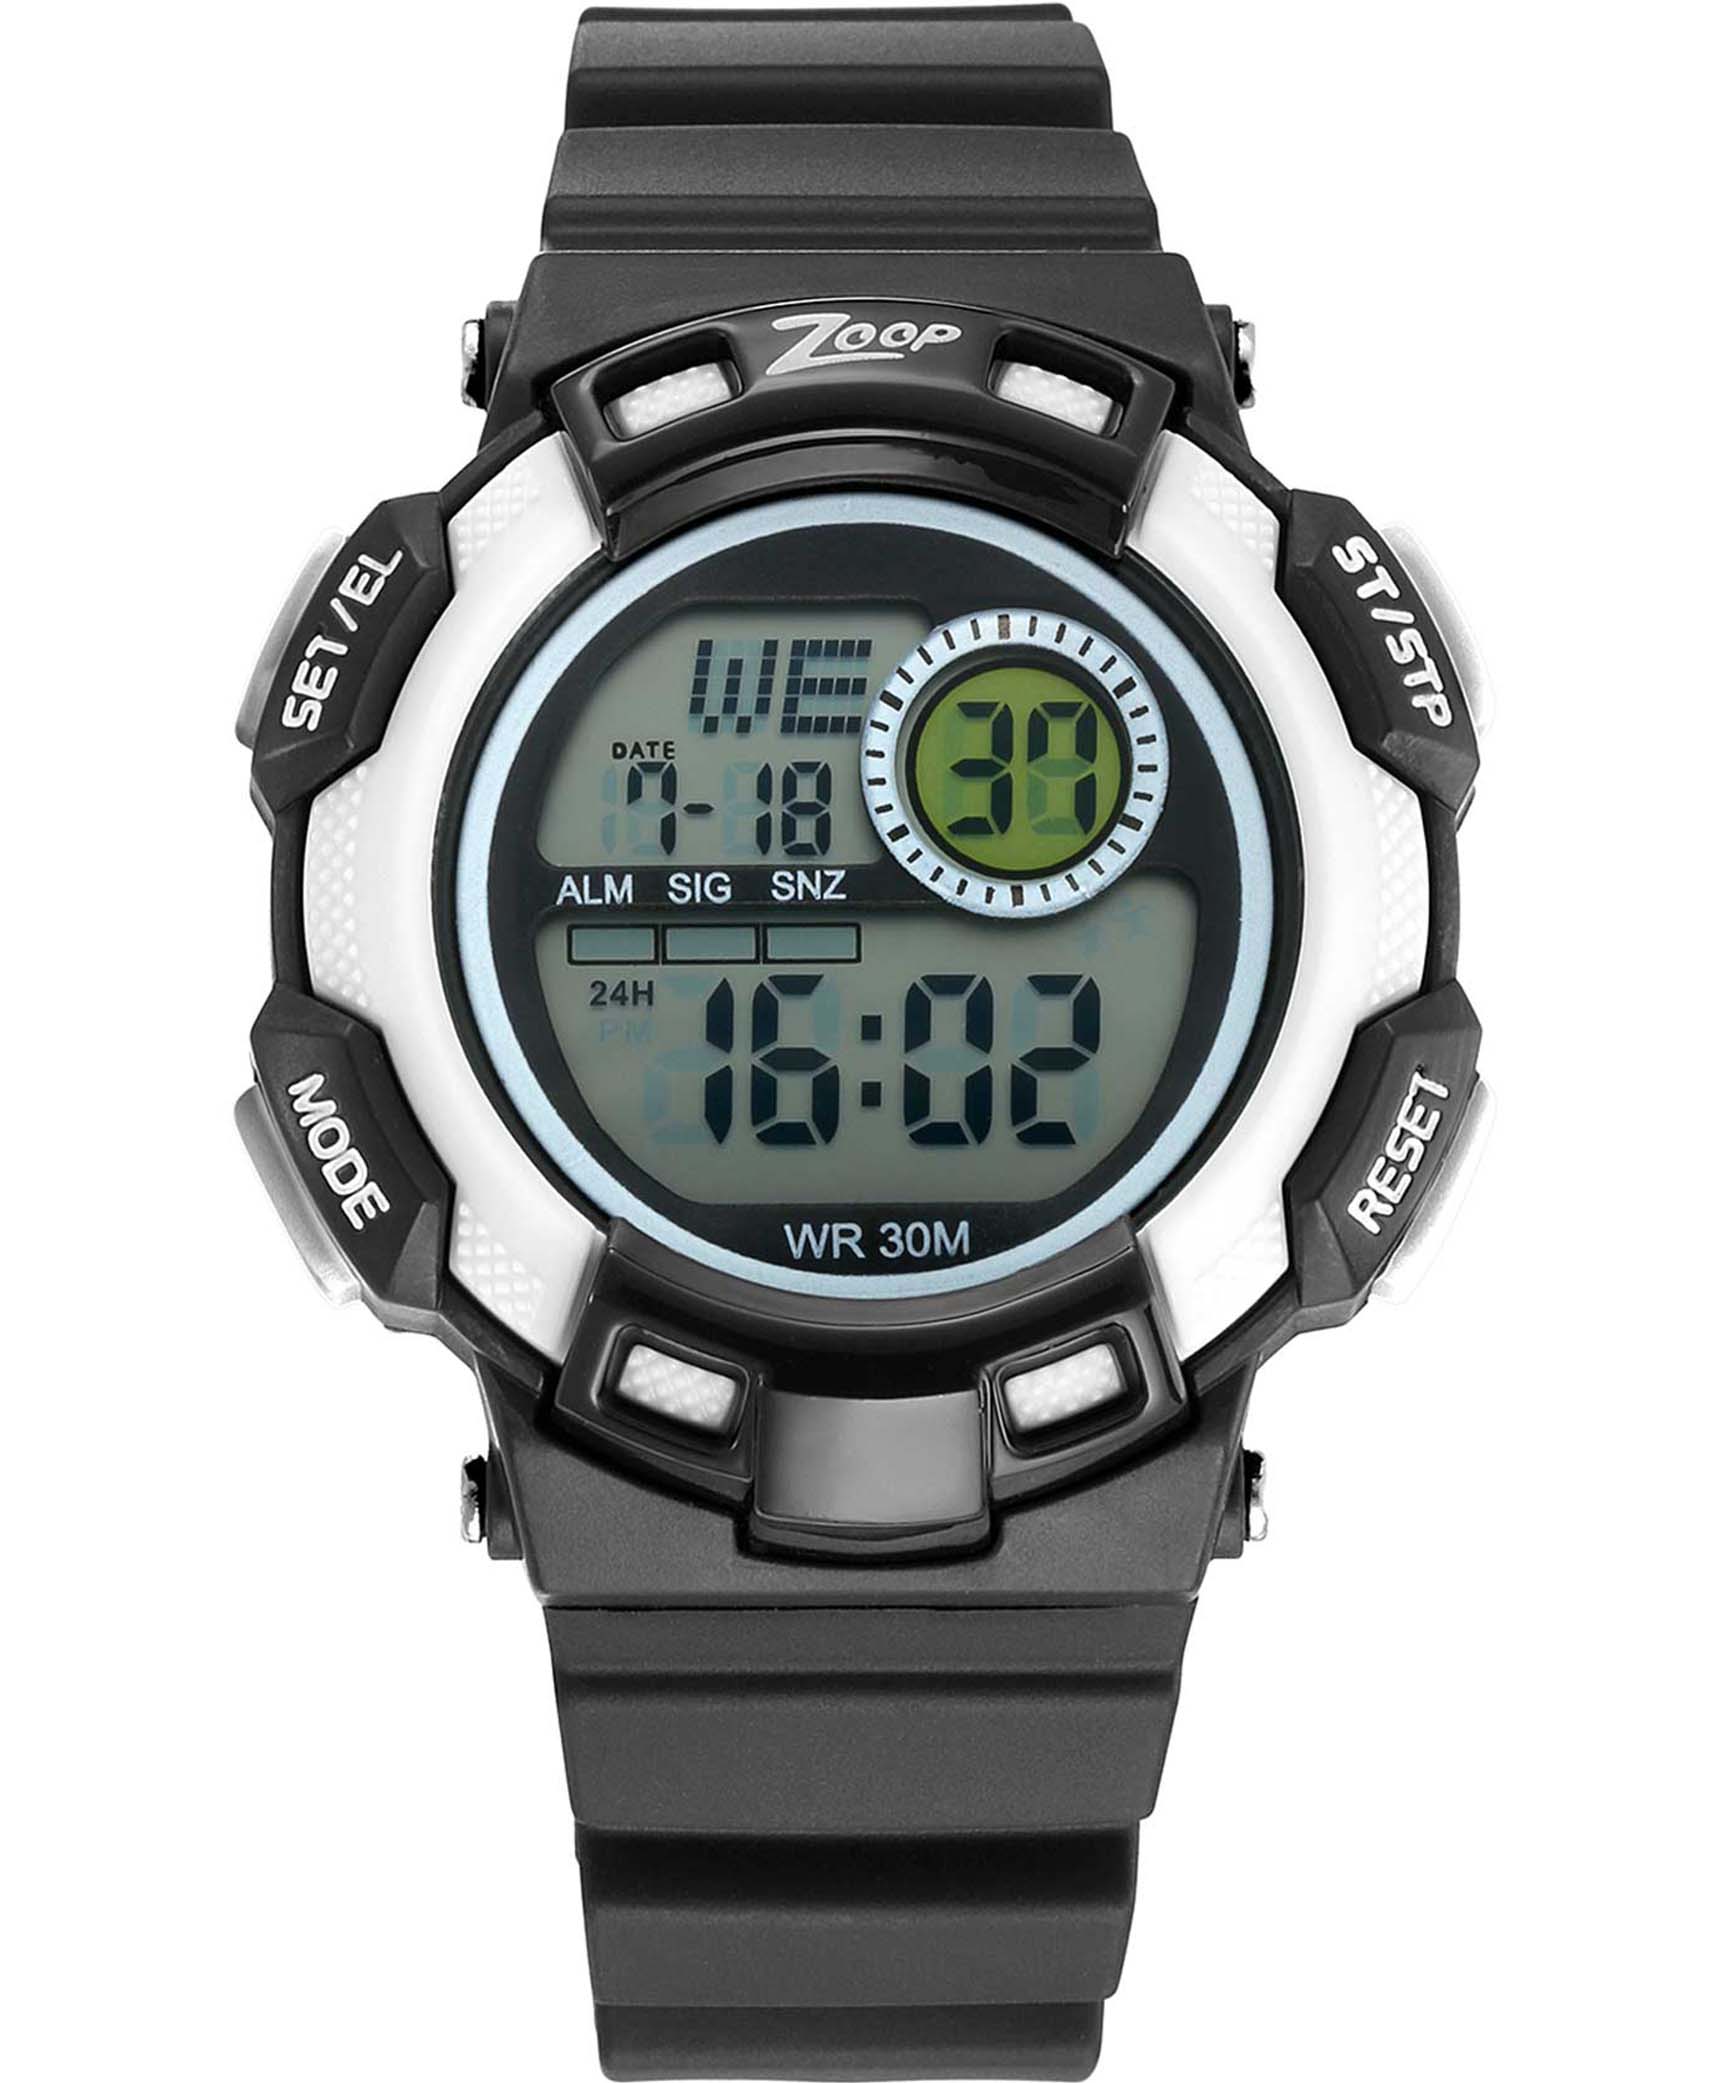 Zoop By Titan Kids Watch Collection Digital, Black Dial Black Plastic Band, 16009PP01